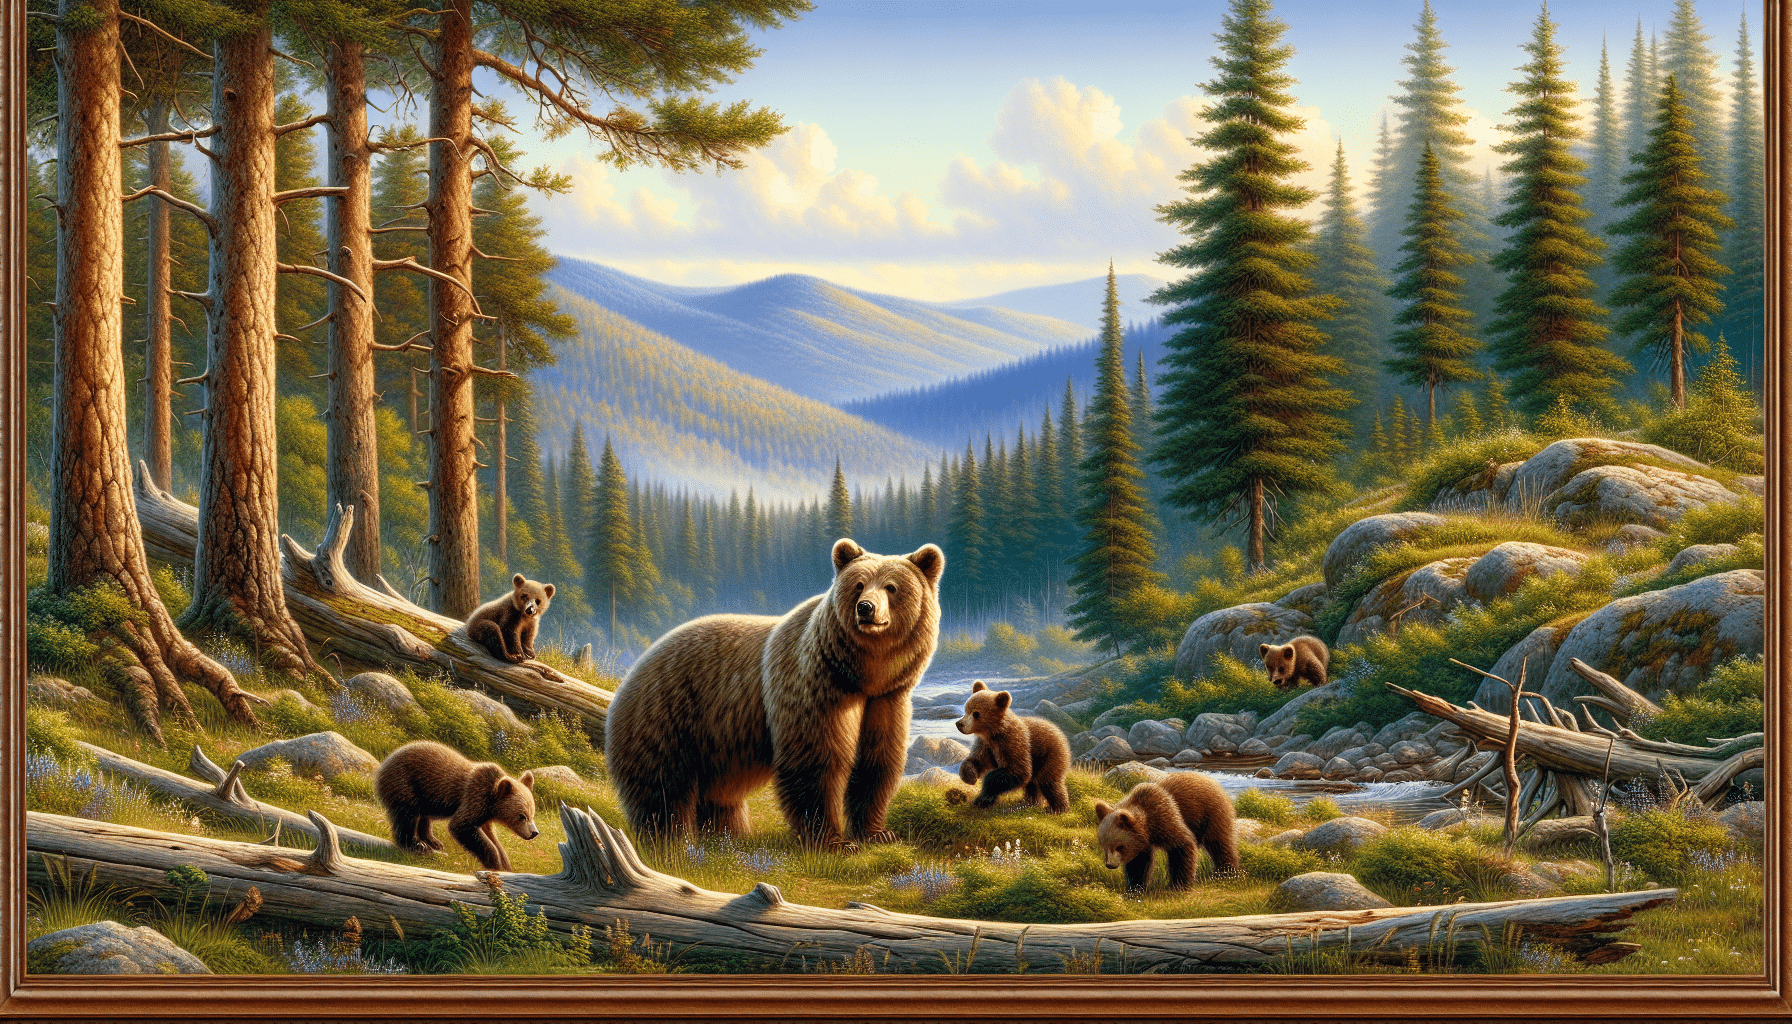 A natural scenery in the heart of the forest. In the foreground, a mother brown bear is depicted with a group of playful cubs playfully exploring and interacting with the surroundings. The background is featuring towering pine trees and distant hills. The scene captures the tranquility and wilderness of bear habitat during the onset of spring, promoting the feeling of new life and growth common to this period. Please note, none of the objects in the image should carry any text or brand logos.